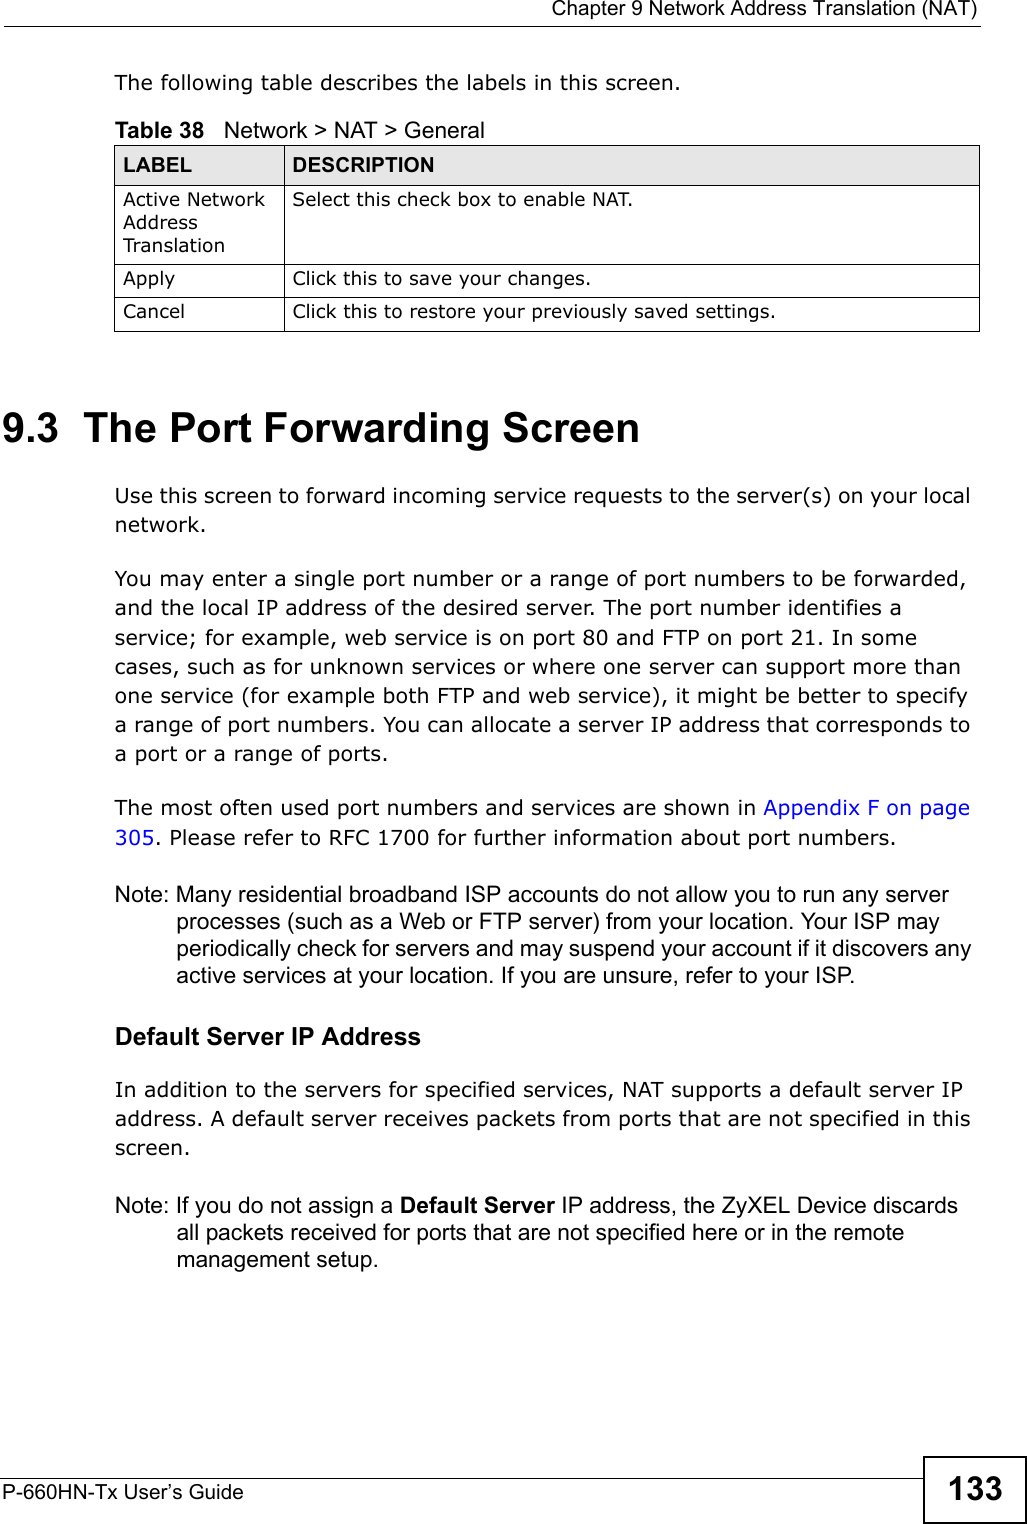  Chapter 9 Network Address Translation (NAT)P-660HN-Tx User’s Guide 133The following table describes the labels in this screen.9.3  The Port Forwarding ScreenUse this screen to forward incoming service requests to the server(s) on your local network.You may enter a single port number or a range of port numbers to be forwarded, and the local IP address of the desired server. The port number identifies a service; for example, web service is on port 80 and FTP on port 21. In some cases, such as for unknown services or where one server can support more than one service (for example both FTP and web service), it might be better to specify a range of port numbers. You can allocate a server IP address that corresponds to a port or a range of ports.The most often used port numbers and services are shown in Appendix F on page 305. Please refer to RFC 1700 for further information about port numbers. Note: Many residential broadband ISP accounts do not allow you to run any server processes (such as a Web or FTP server) from your location. Your ISP may periodically check for servers and may suspend your account if it discovers any active services at your location. If you are unsure, refer to your ISP.Default Server IP AddressIn addition to the servers for specified services, NAT supports a default server IP address. A default server receives packets from ports that are not specified in this screen.Note: If you do not assign a Default Server IP address, the ZyXEL Device discards all packets received for ports that are not specified here or in the remote management setup.Table 38   Network &gt; NAT &gt; GeneralLABEL DESCRIPTIONActive Network Address Translation Select this check box to enable NAT.Apply Click this to save your changes.Cancel Click this to restore your previously saved settings.